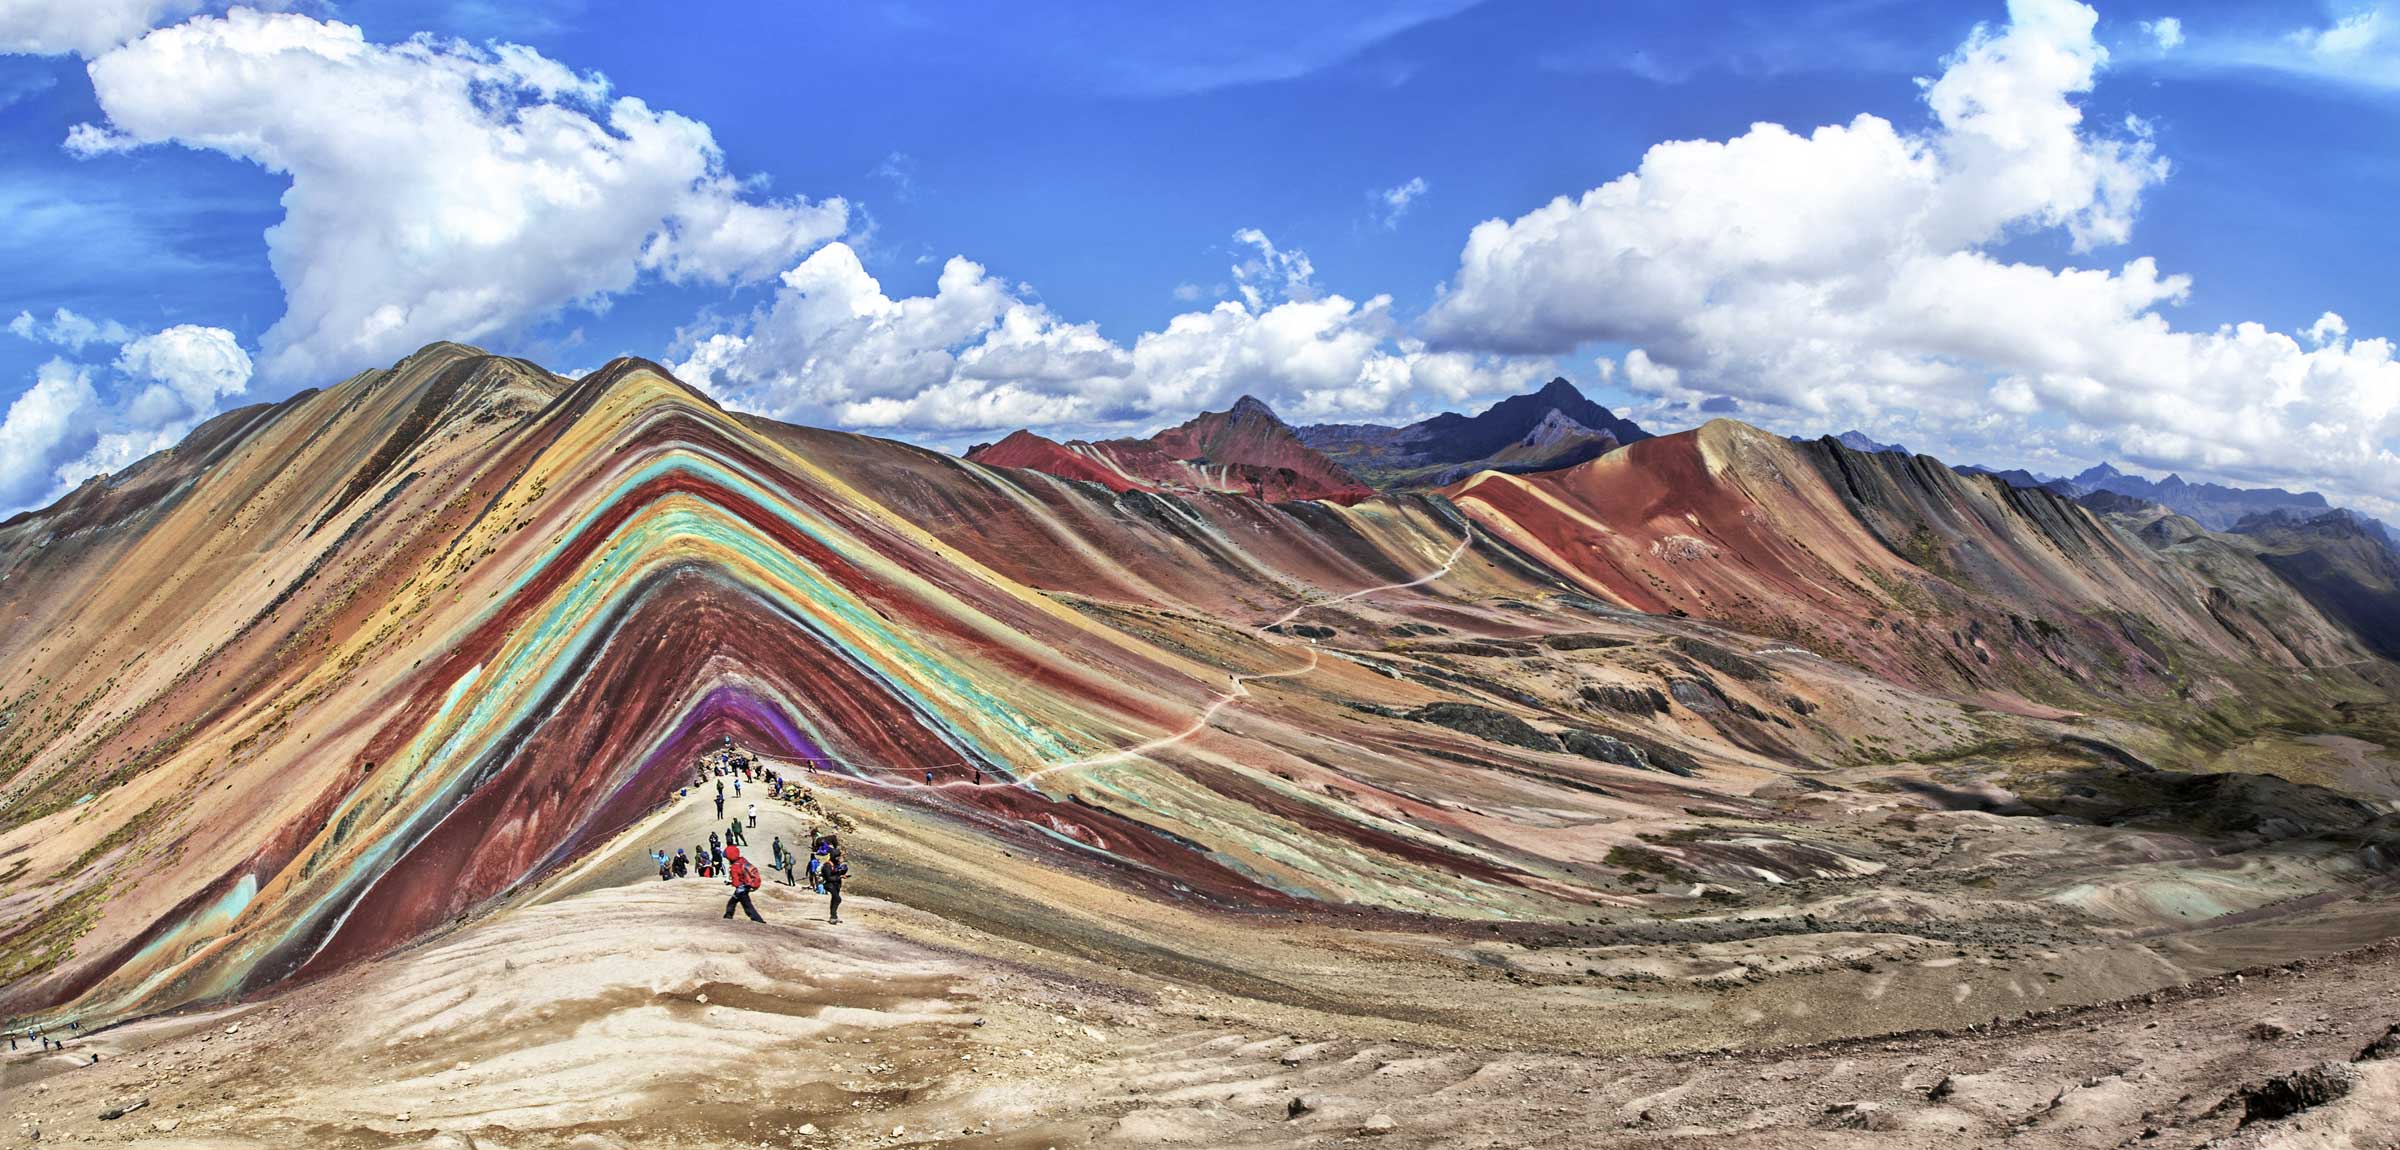 View of Rainbow Mountain in Peru